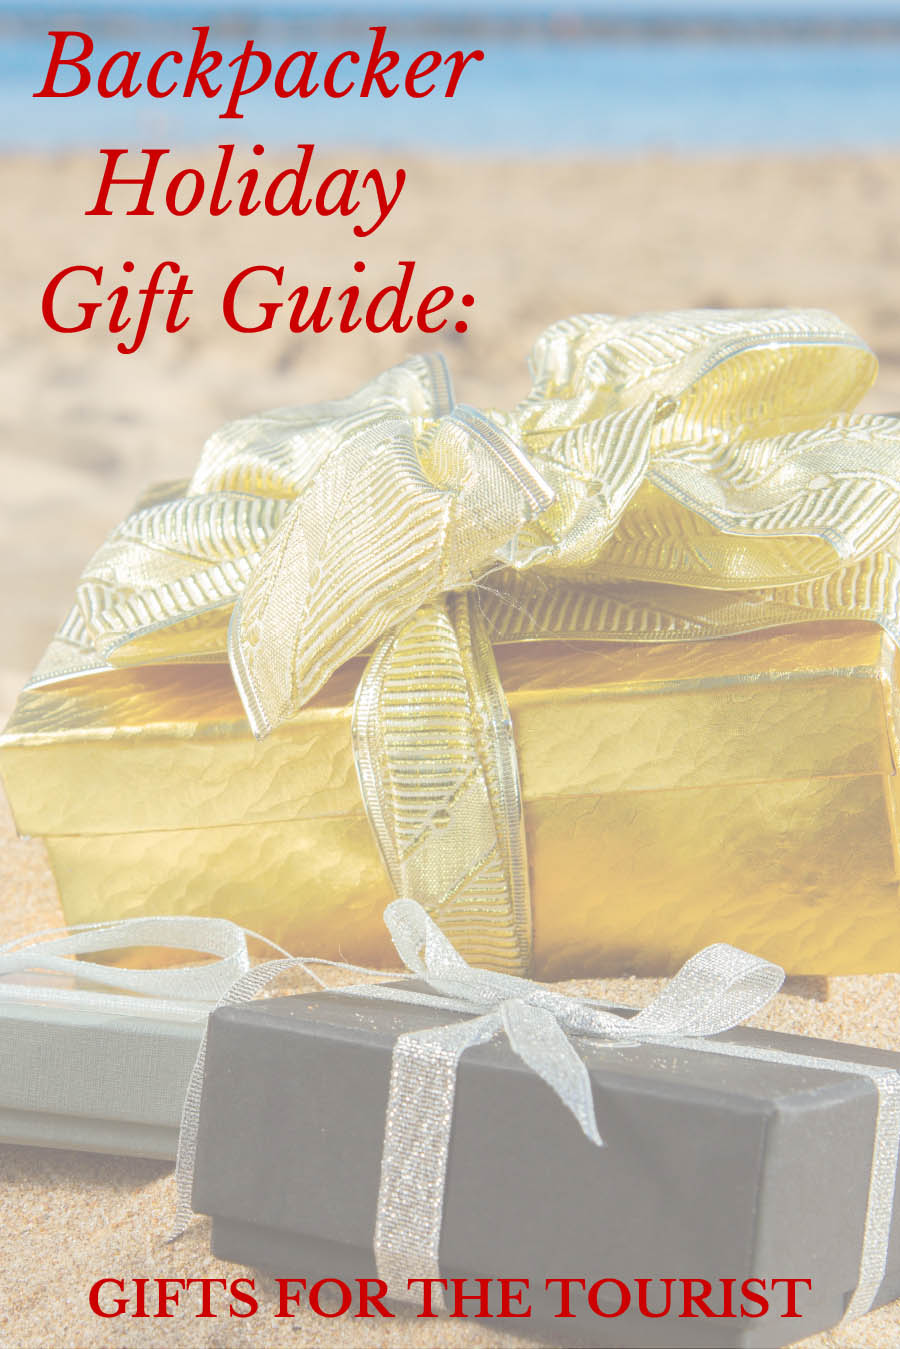 Backpacker Holiday Gift Guide: Gifts for the Tourist